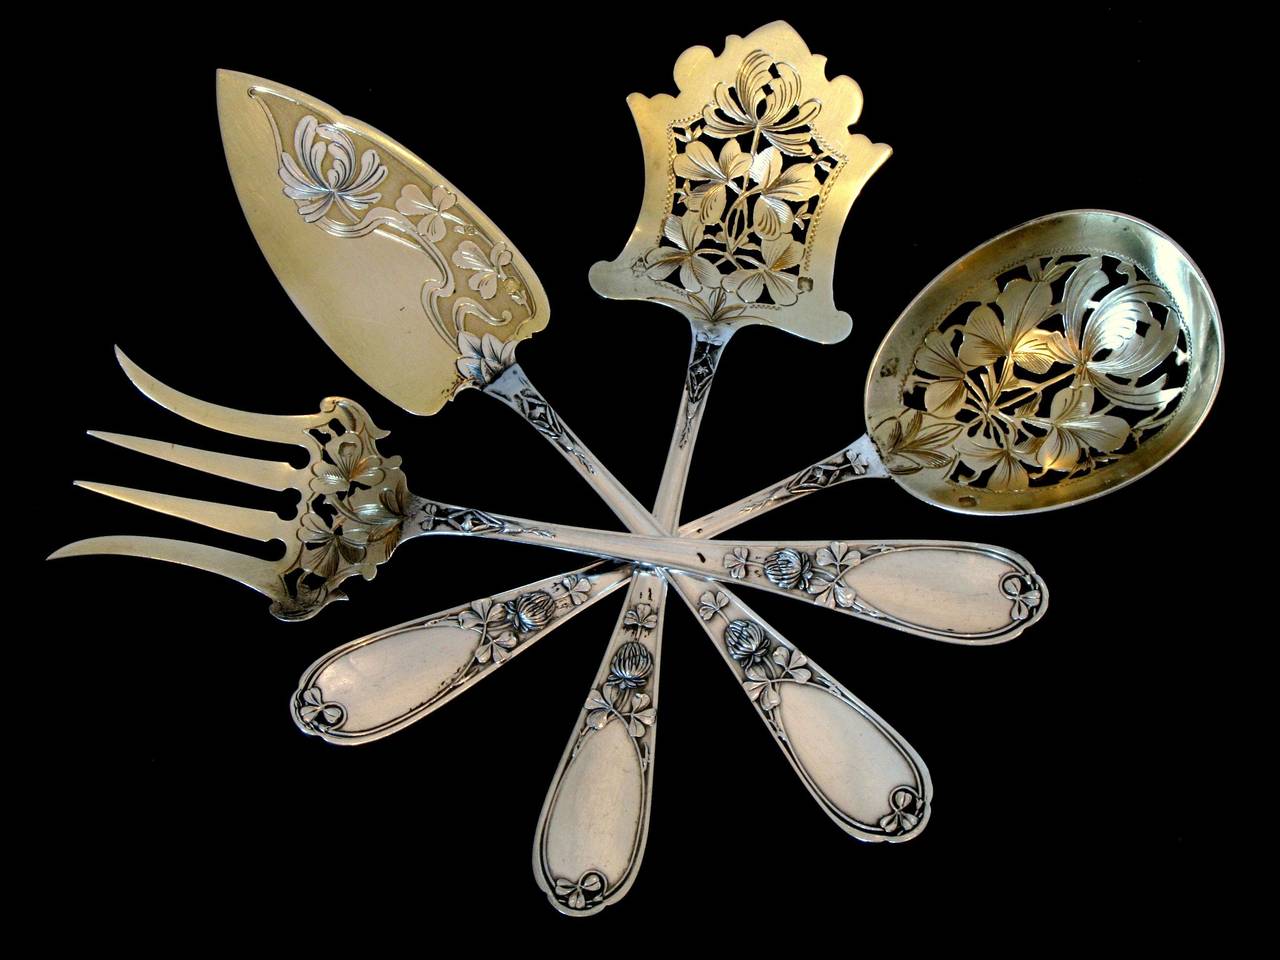 Ernie Rare French All Sterling Silver Vermeil Hors D'Oeuvre Set 4 pc Box Clovers 4